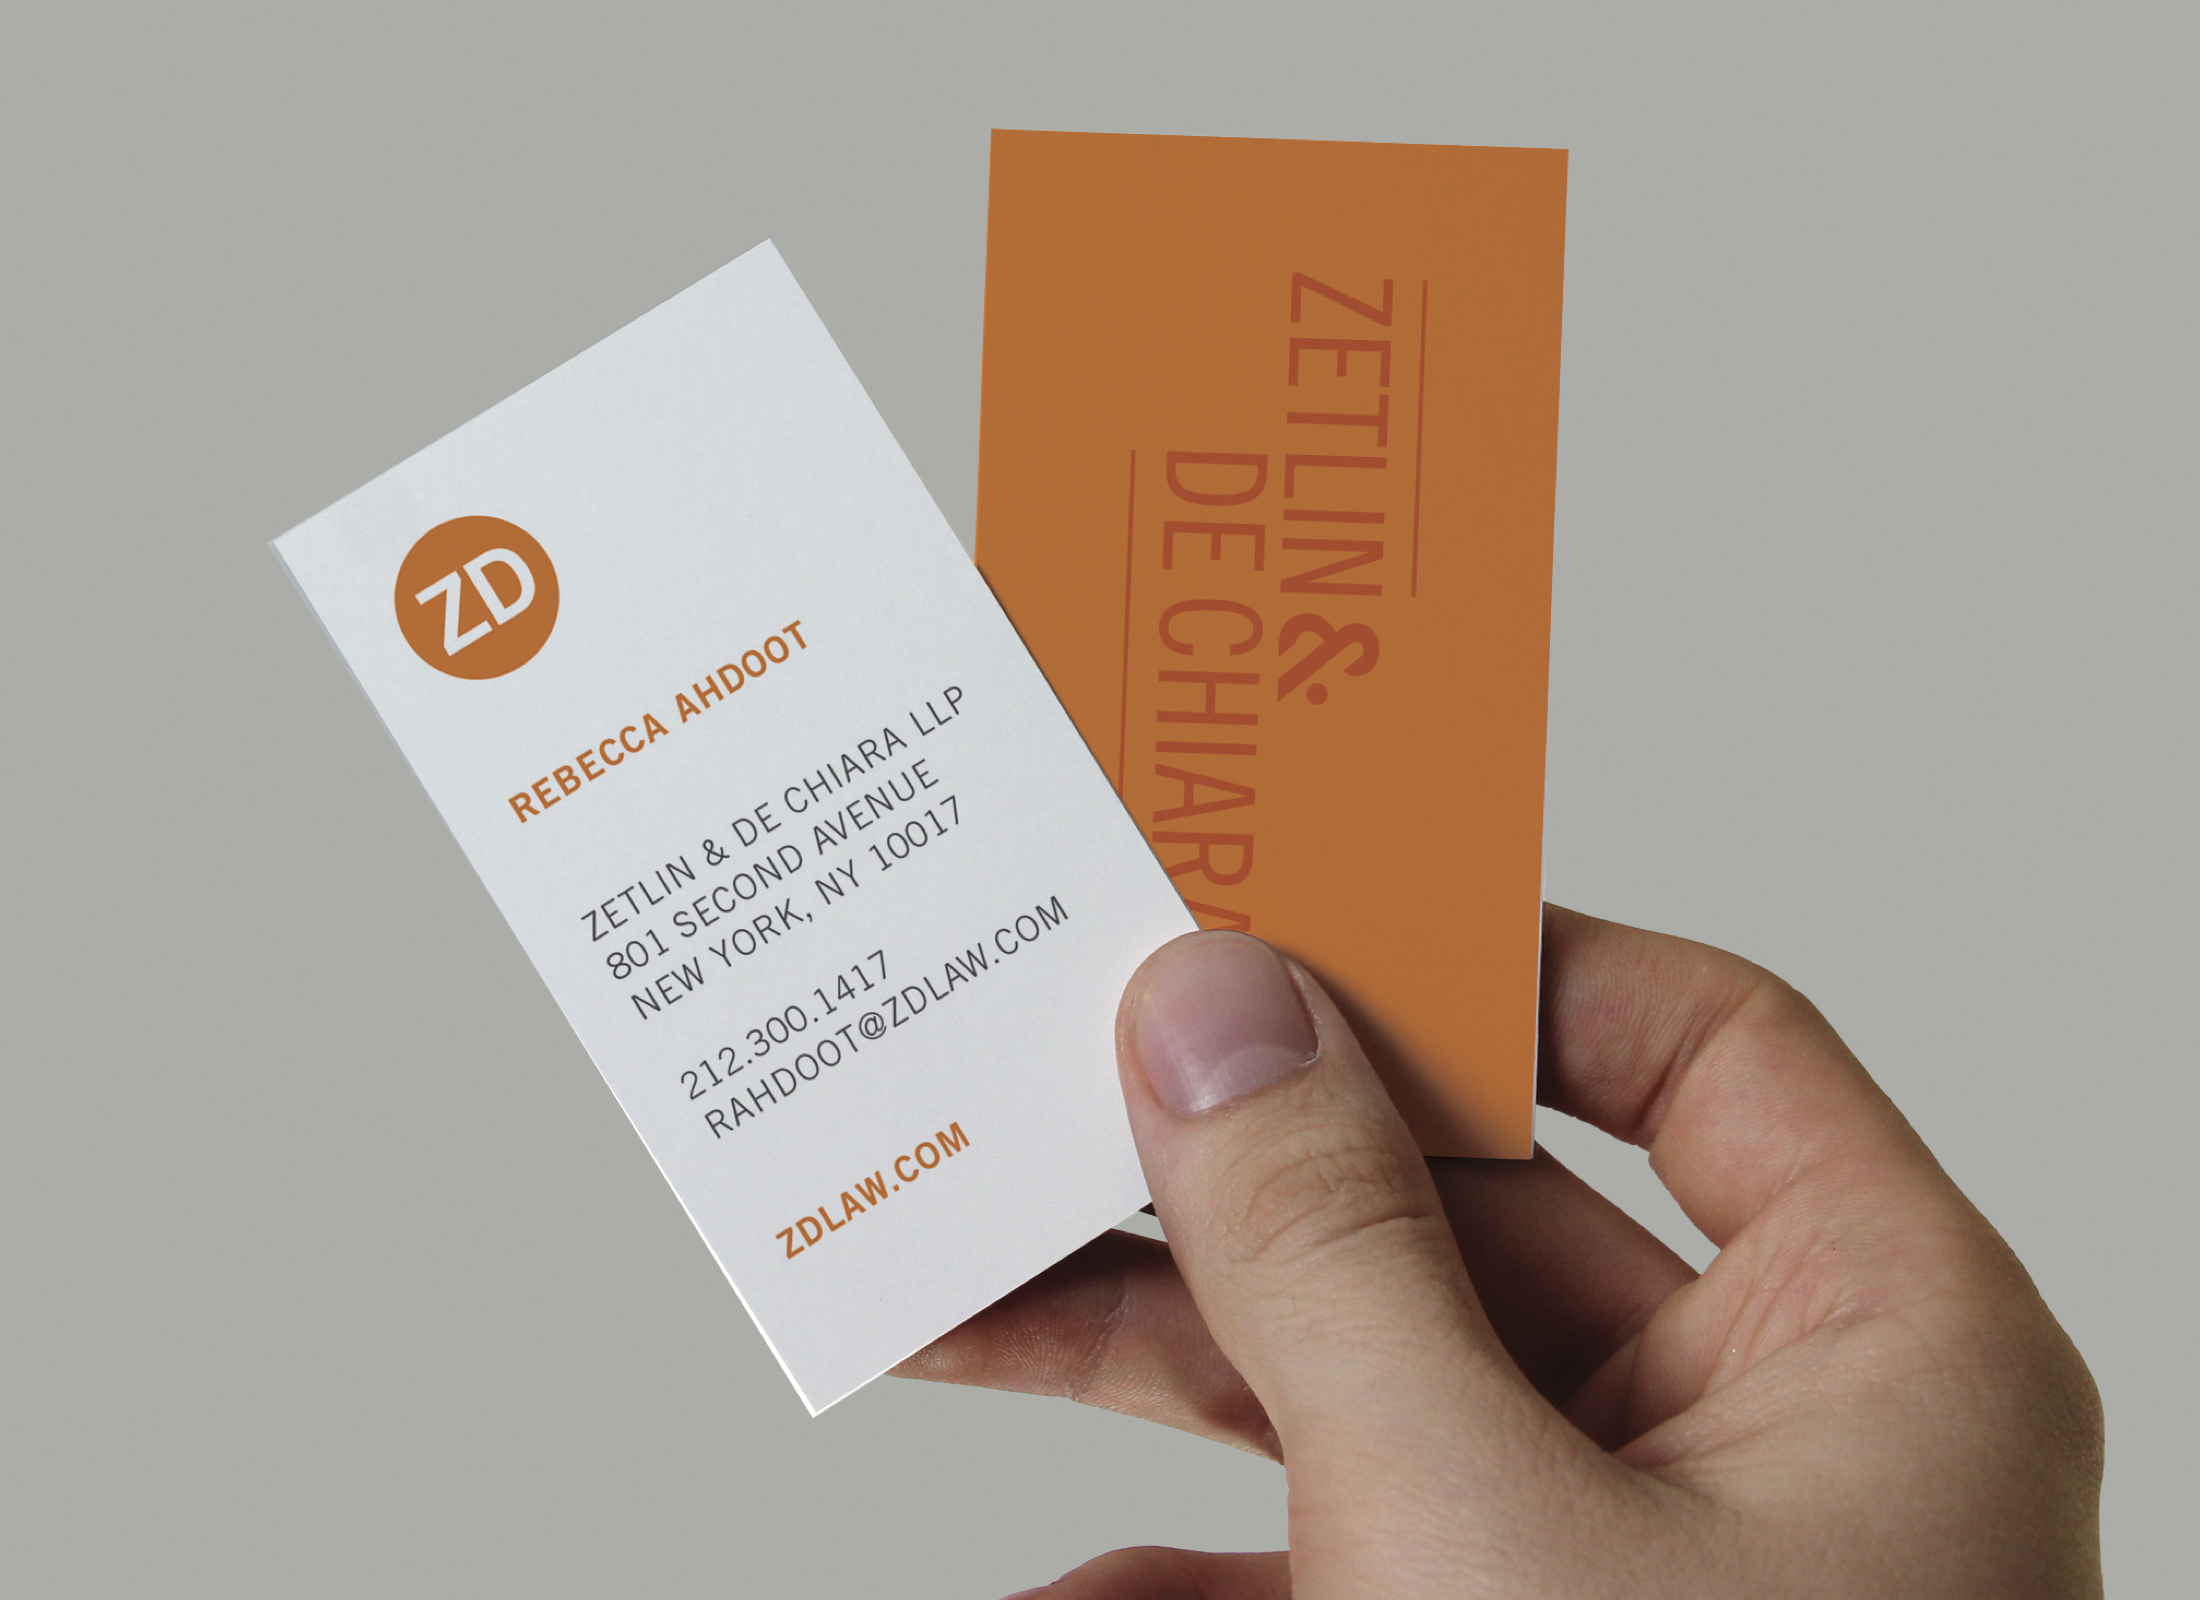 Law Firm Business Cards